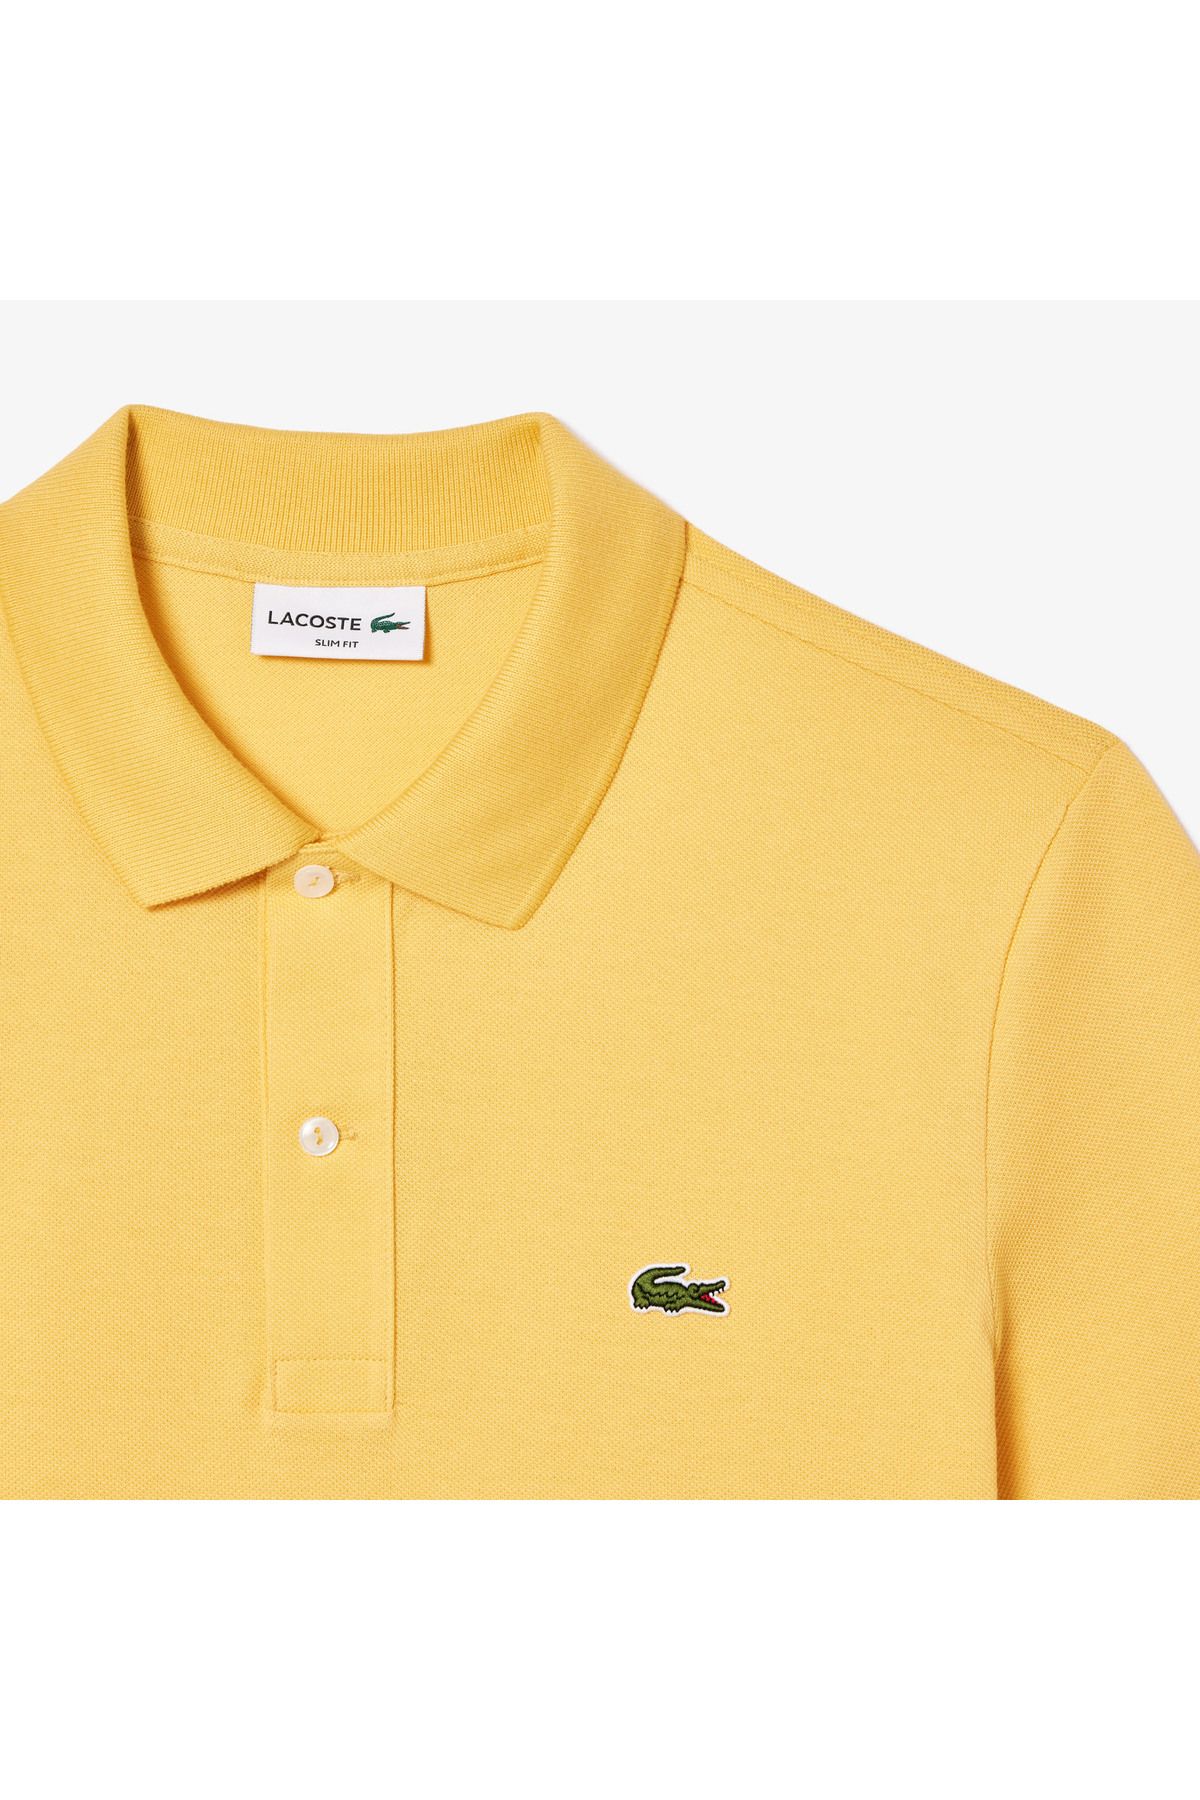 Lacoste L.12.12 Slim Fit Yellow Polo